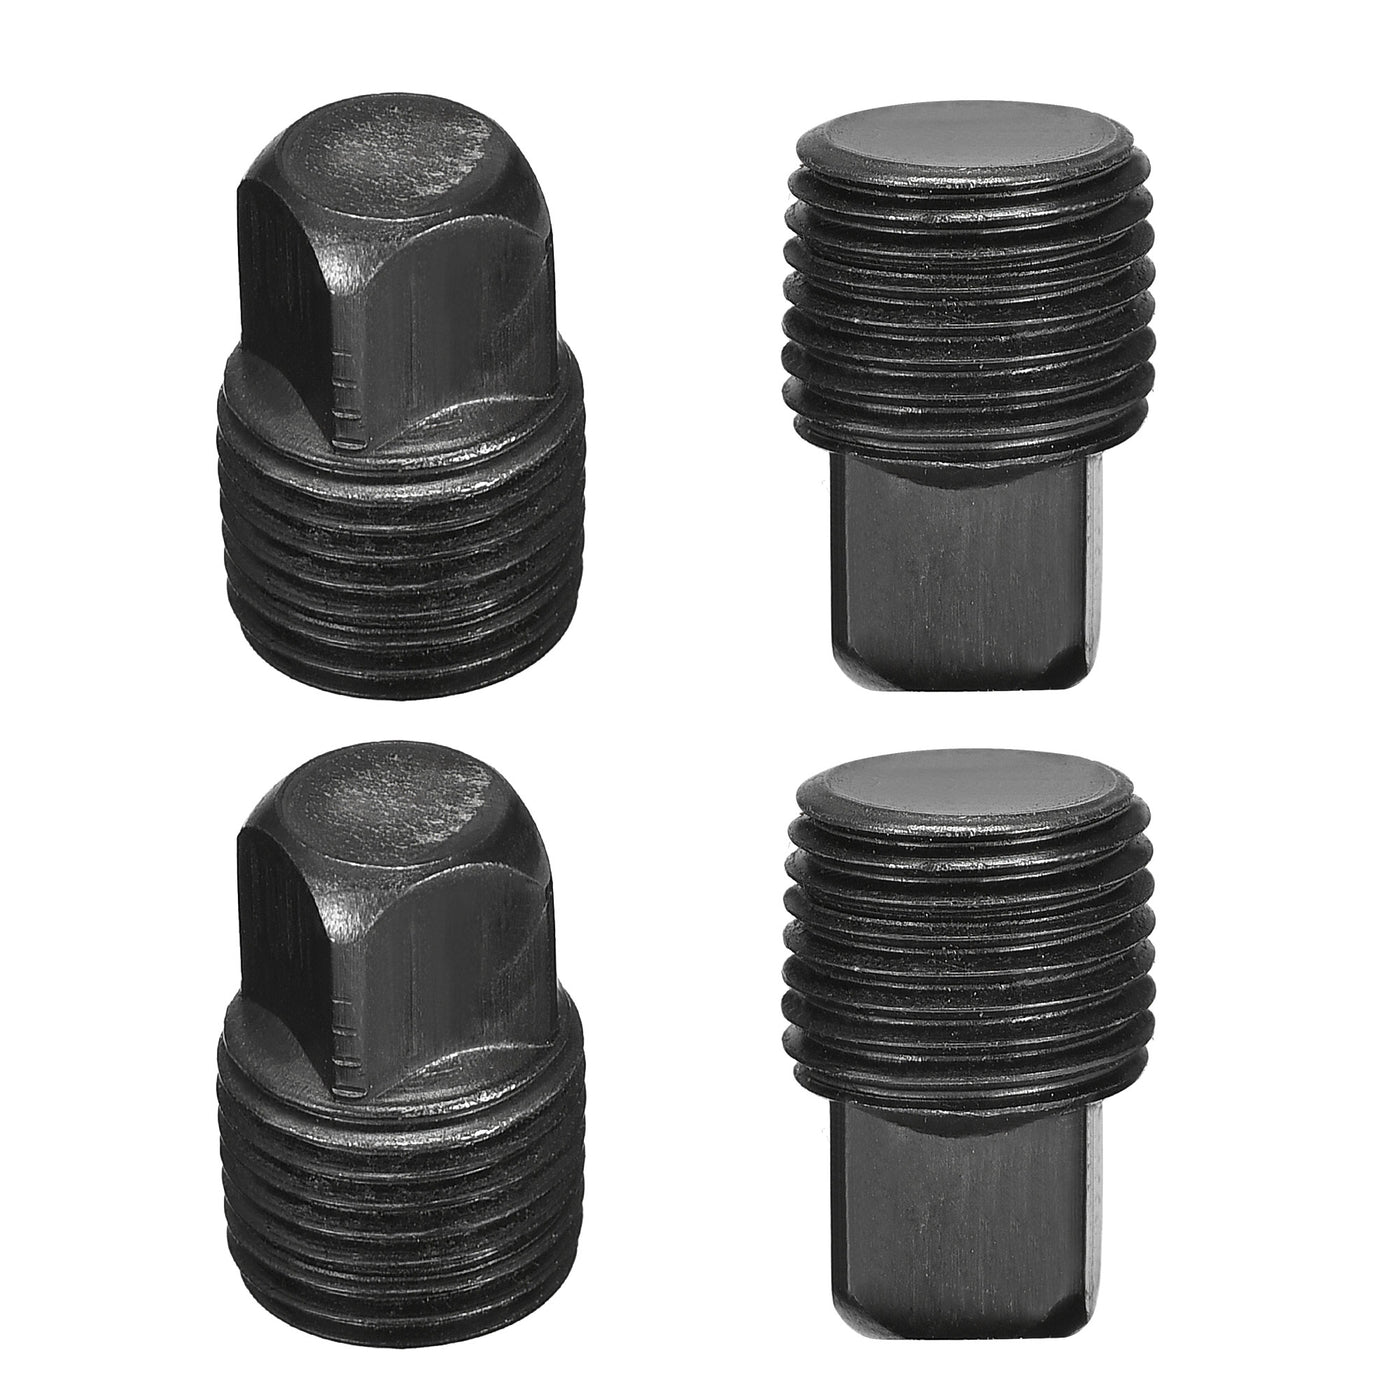 uxcell Uxcell Outer Square Head Socket Pipe Fitting Plug 1/8NPT Male Thread Carbon Steel 4Pcs for Terminate Pipe Ends